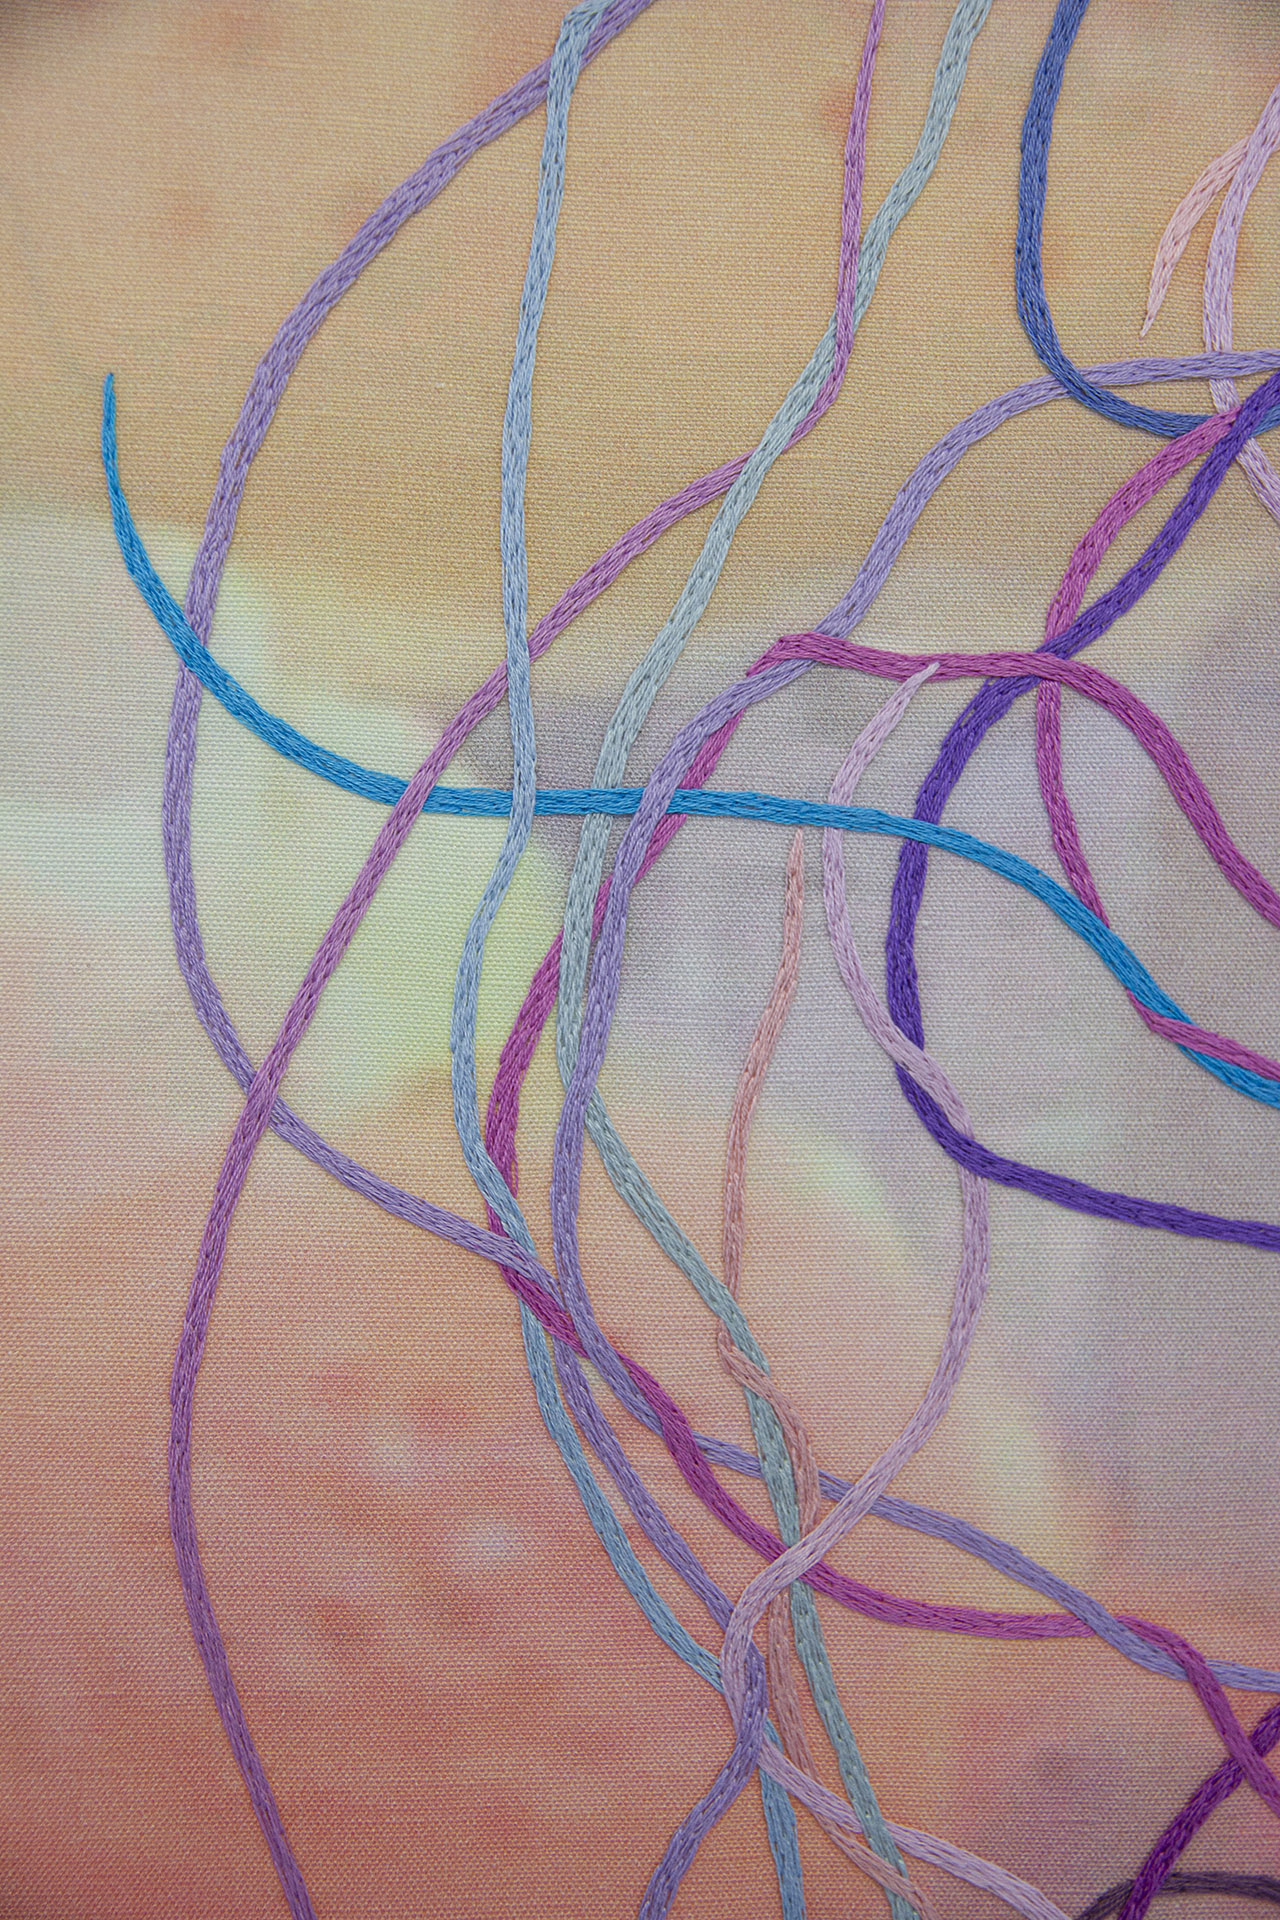 Knot Theory, detail of hand embroidery, 2021